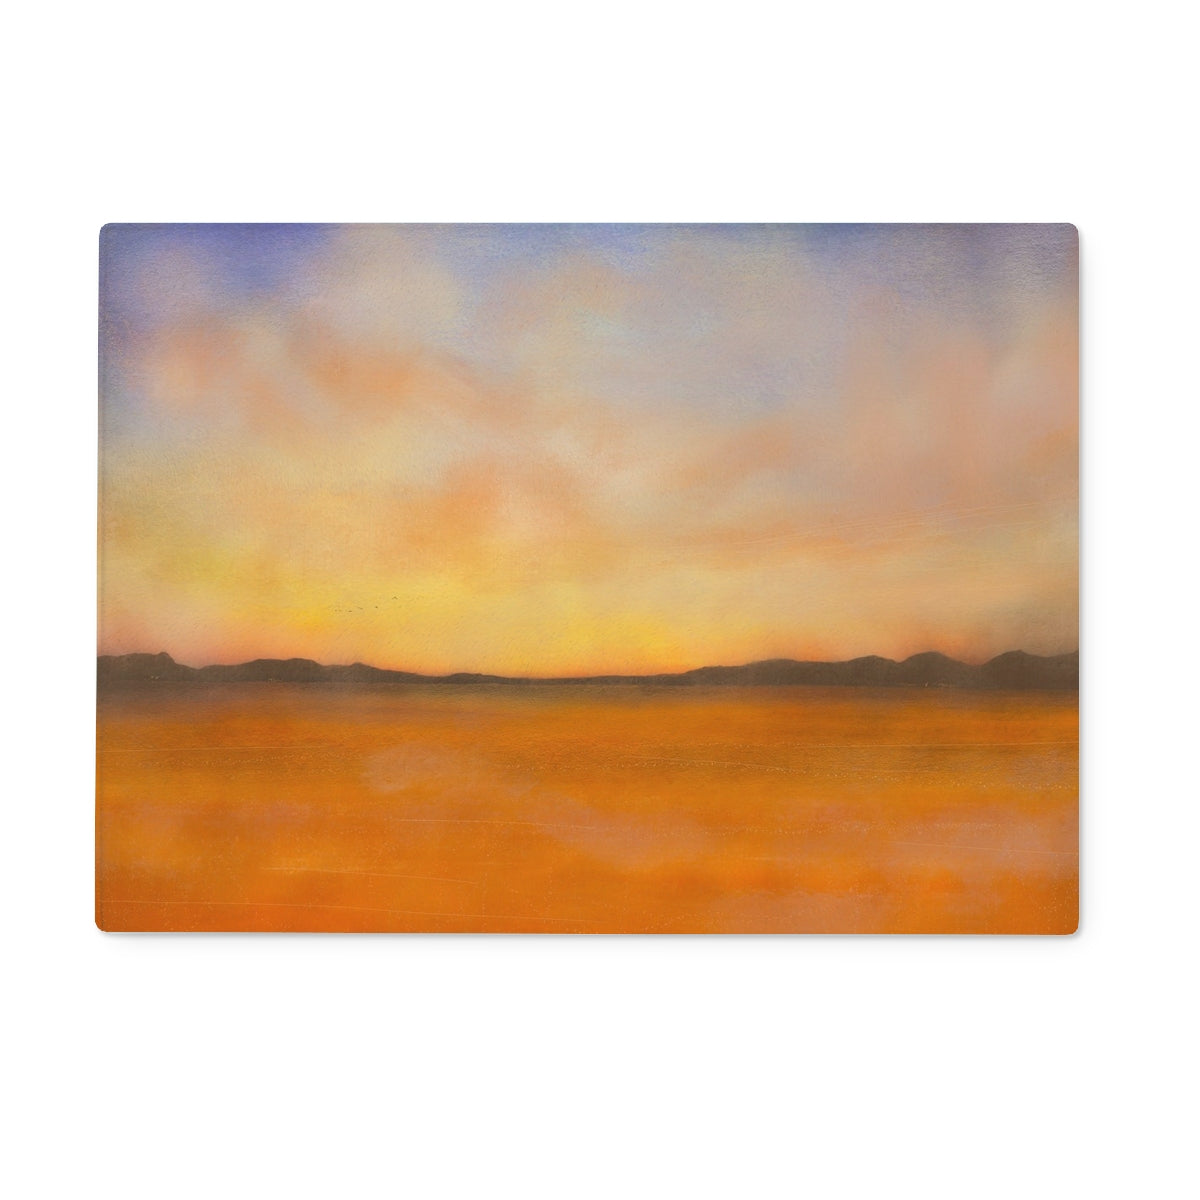 Islay Dawn Art Gifts Glass Chopping Board-Glass Chopping Boards-Hebridean Islands Art Gallery-15"x11" Rectangular-Paintings, Prints, Homeware, Art Gifts From Scotland By Scottish Artist Kevin Hunter